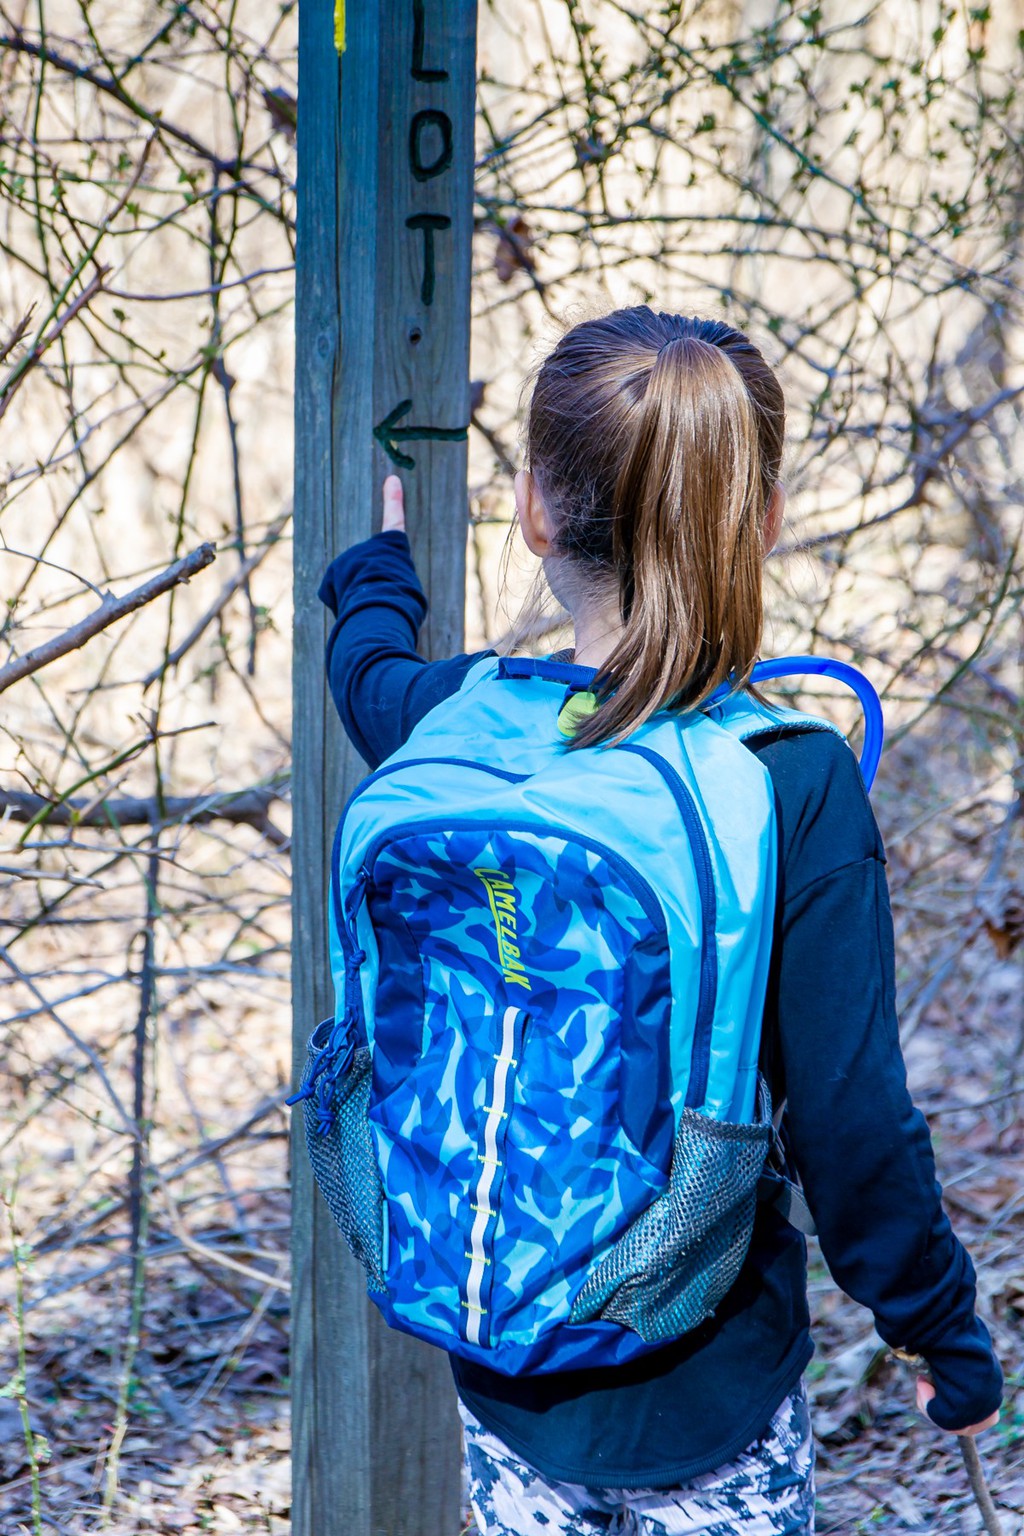 Hiking Gear: 9 Essentials For Safe Hiking Trips With The Family